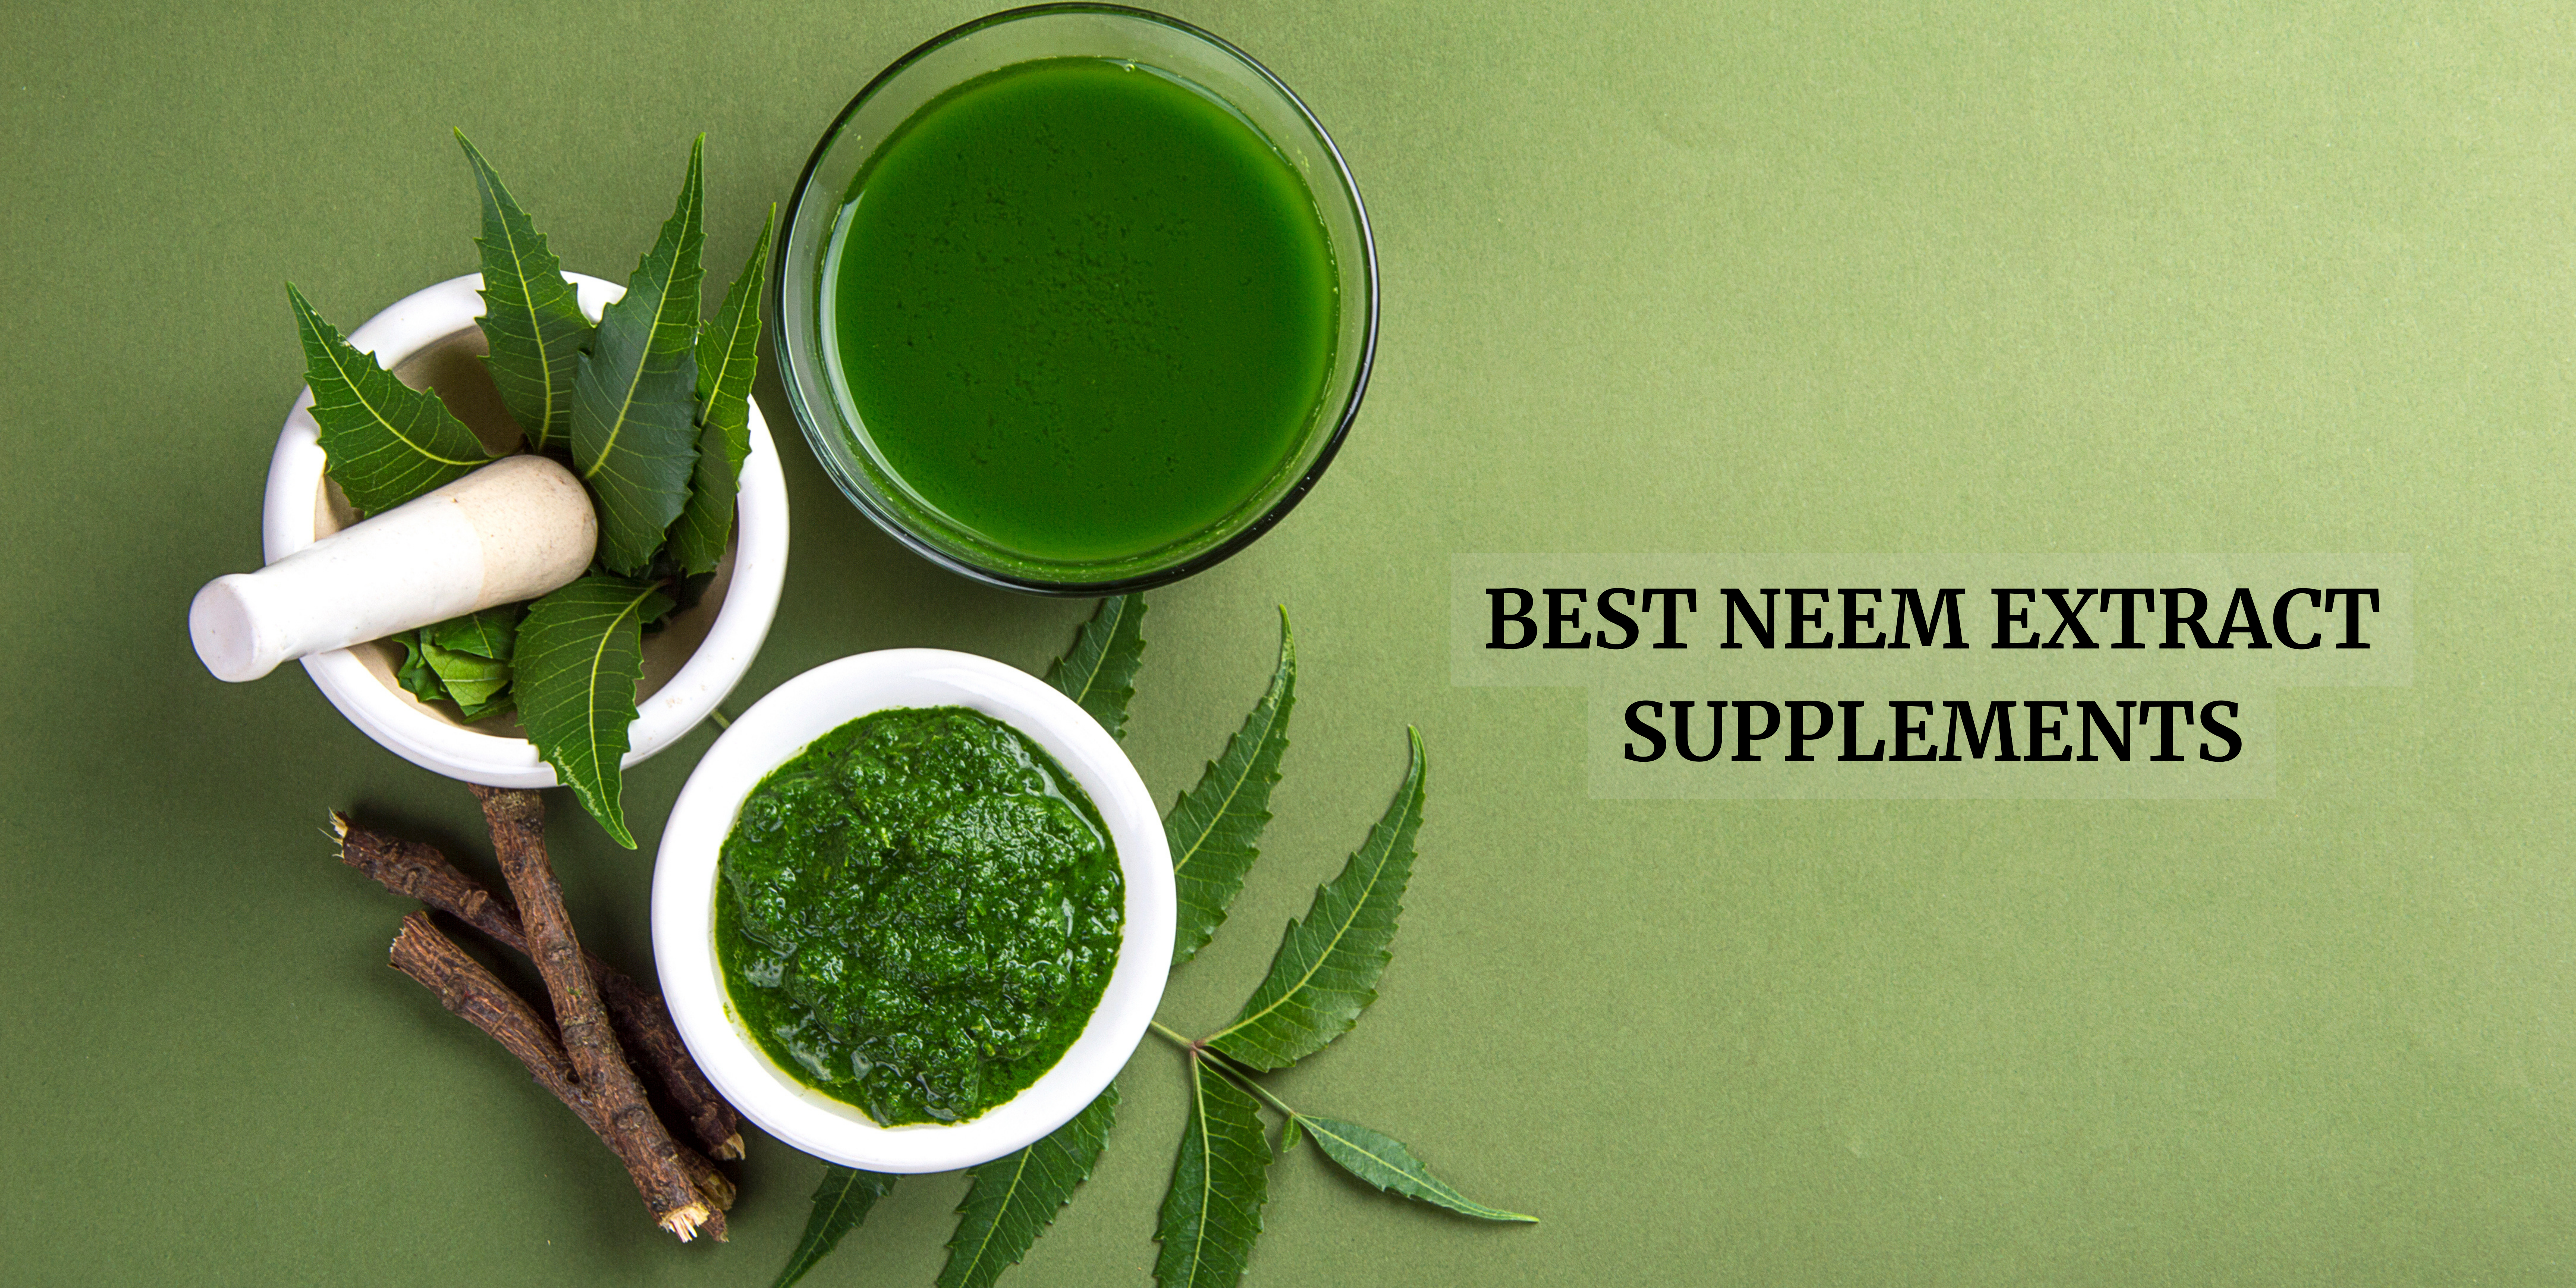 neem extract supplements in India